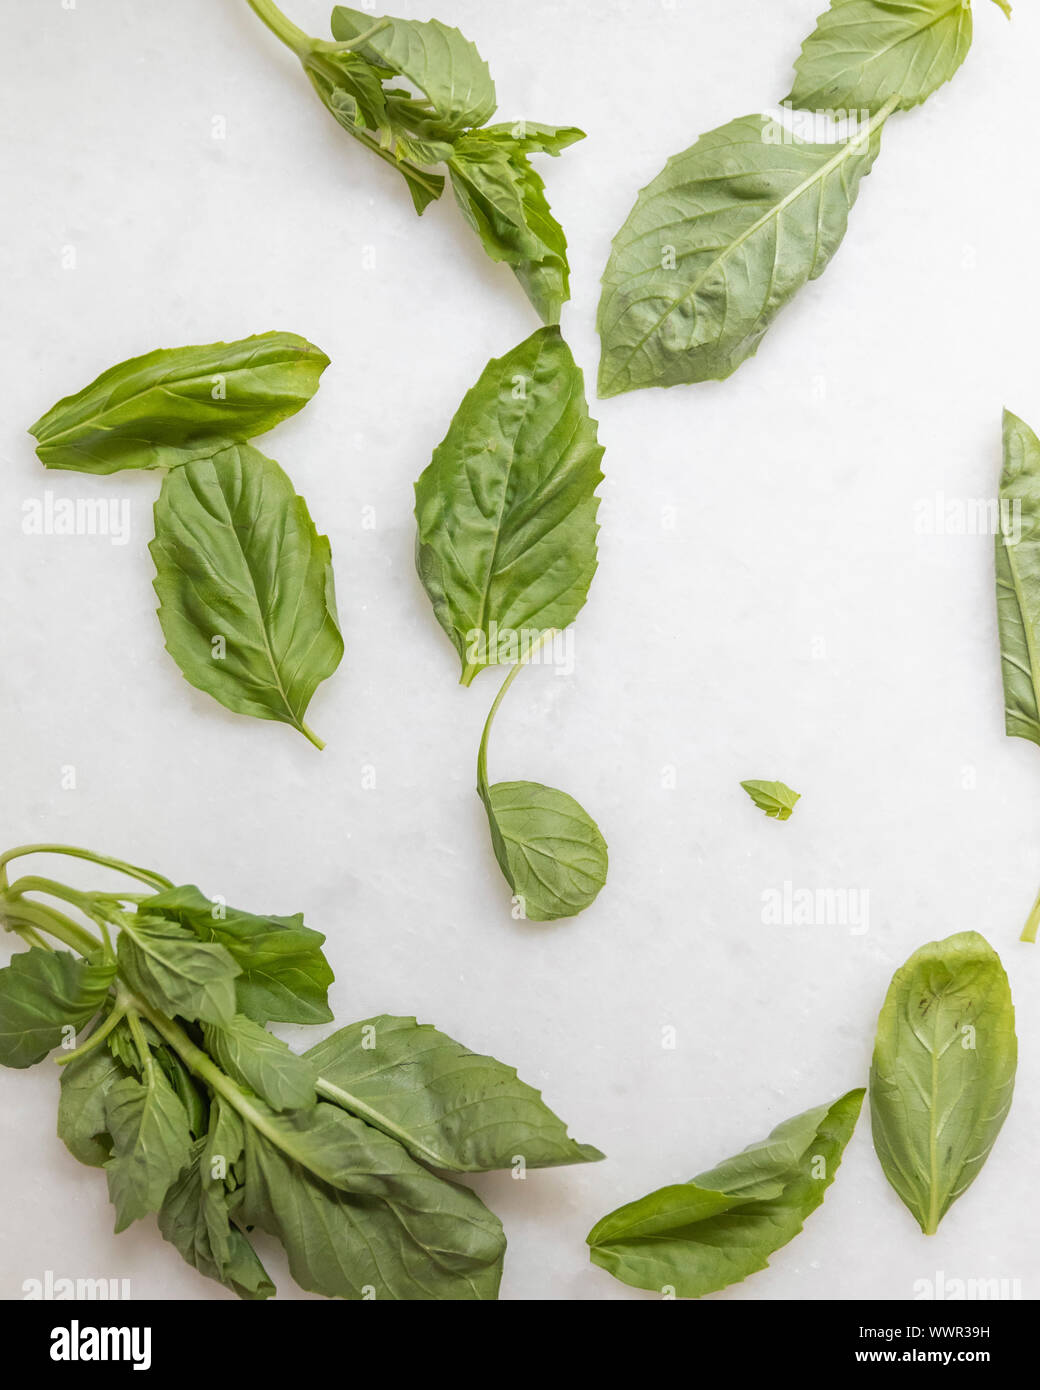 green basil leaves lying on marble counter Stock Photo